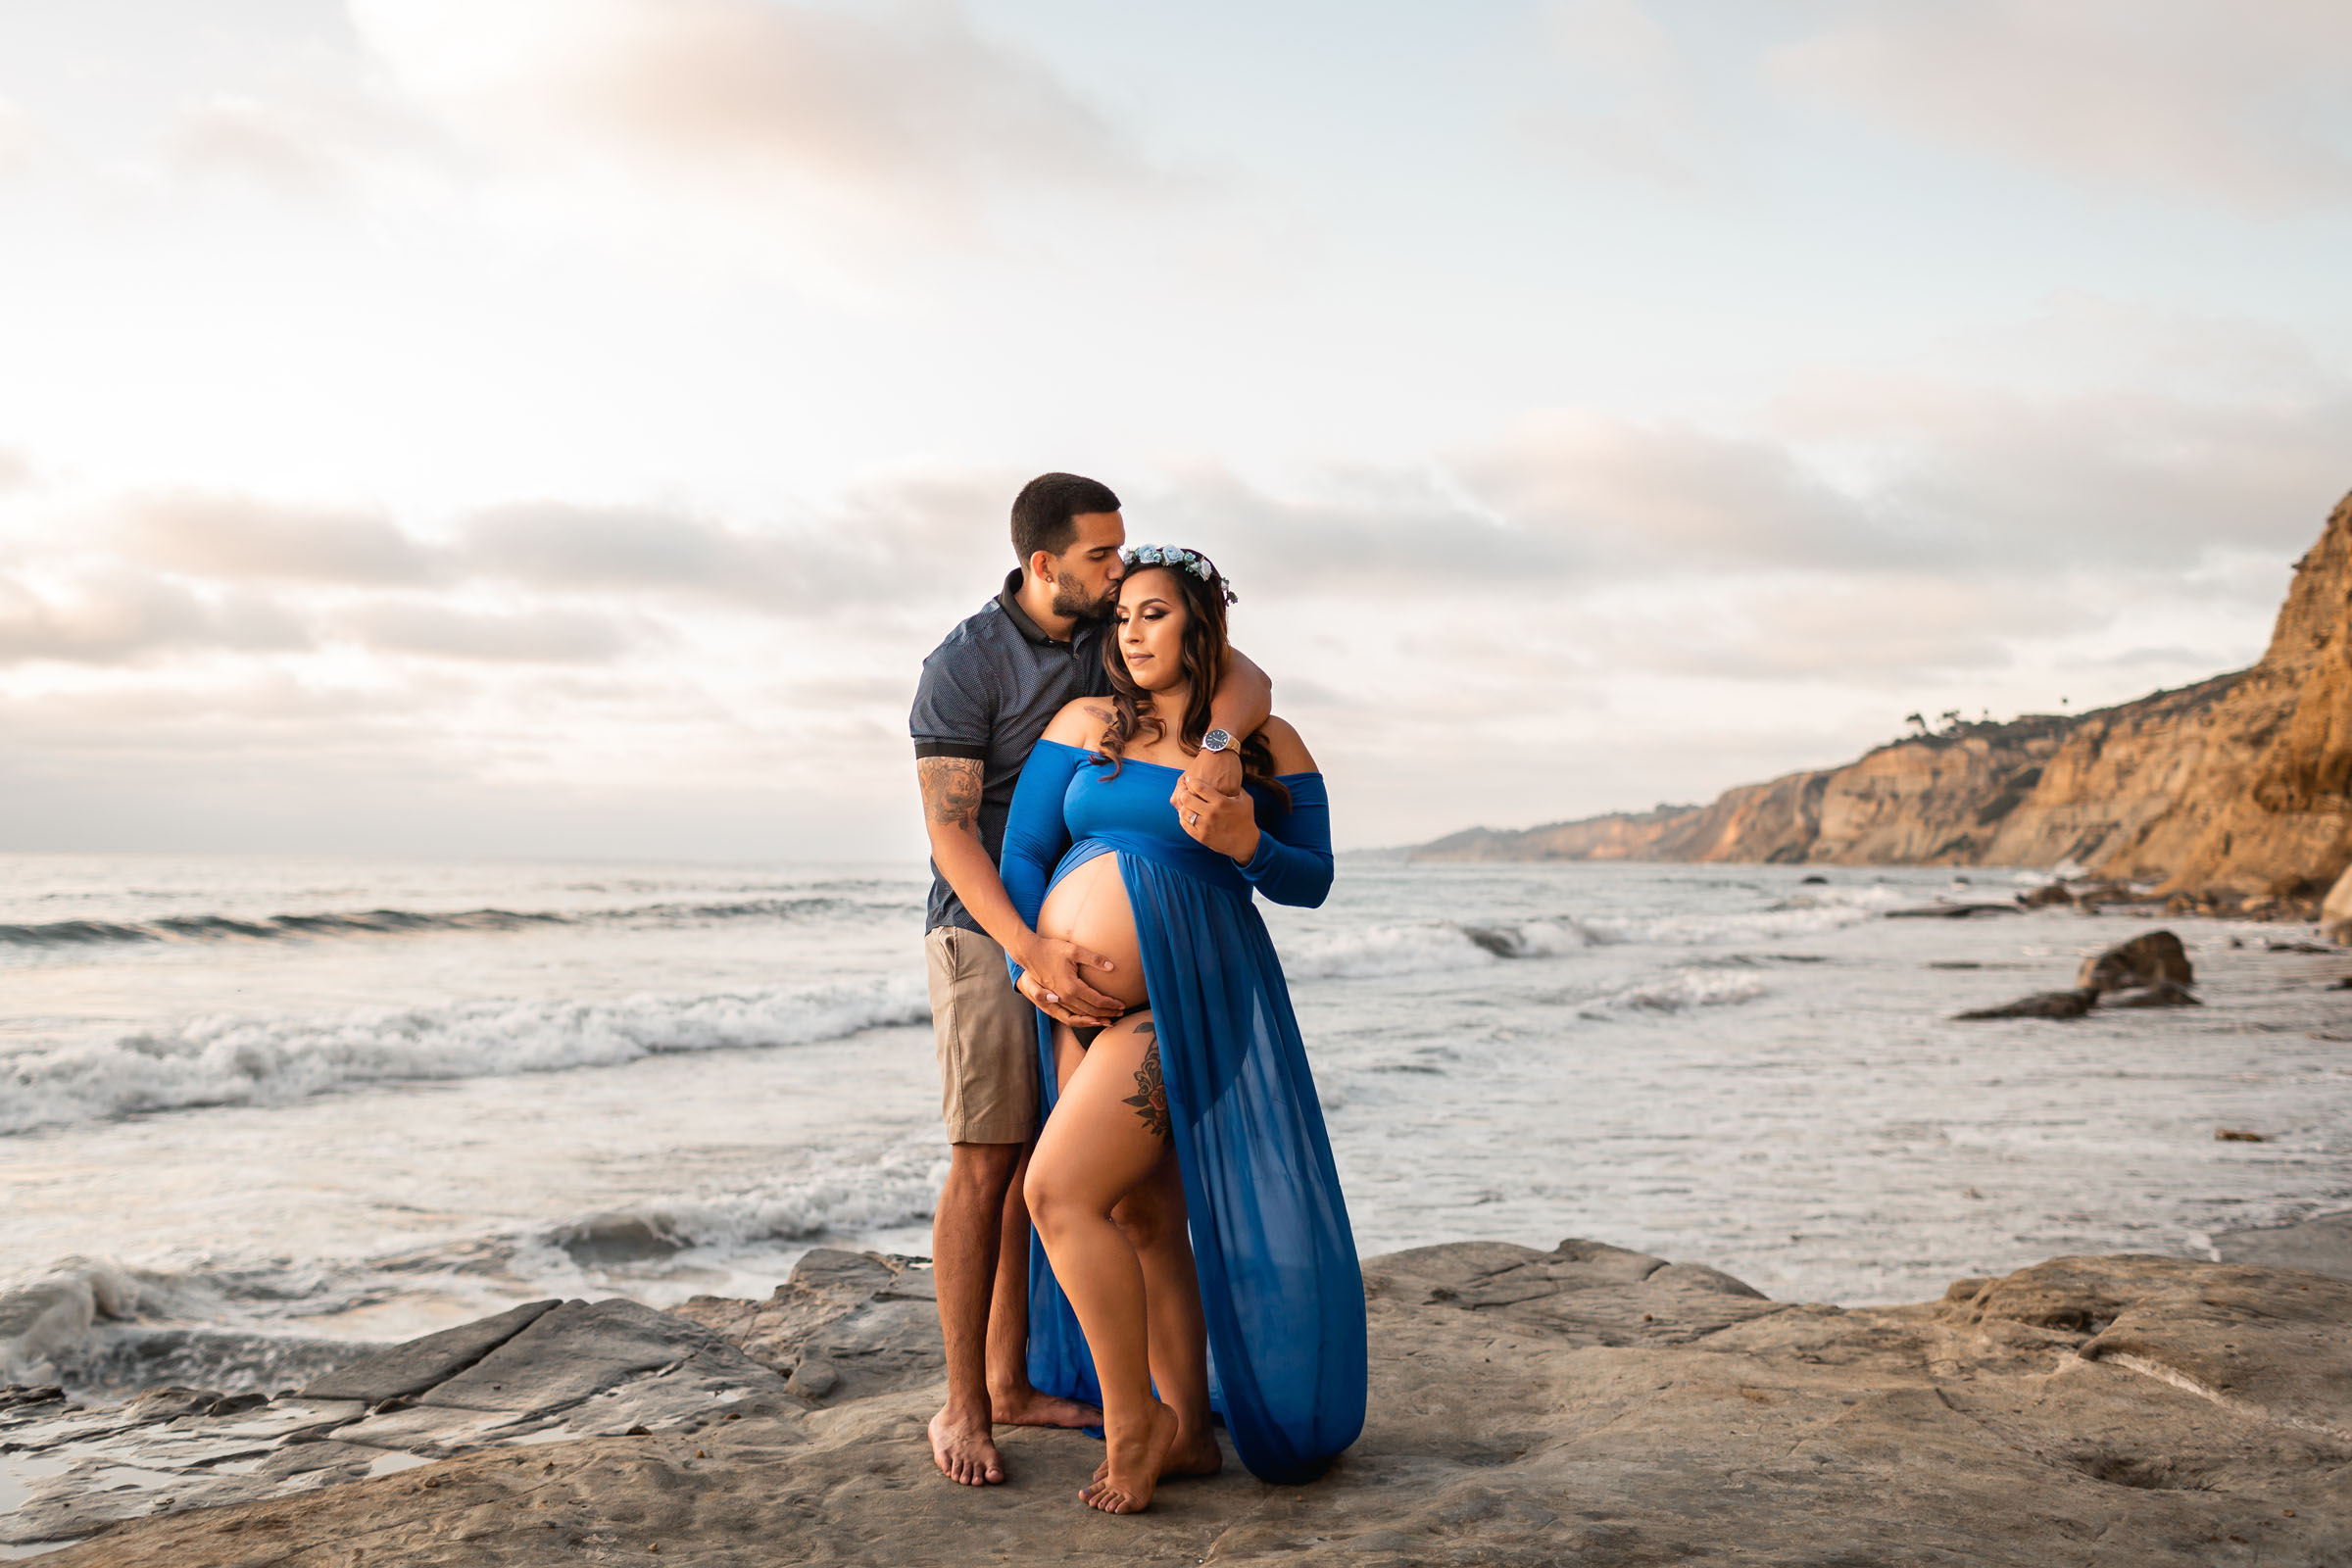 Announcement Pregnancy Maternity Pictures at Balboa Park Desert Garden, Best San Diego Location for maternity Photos